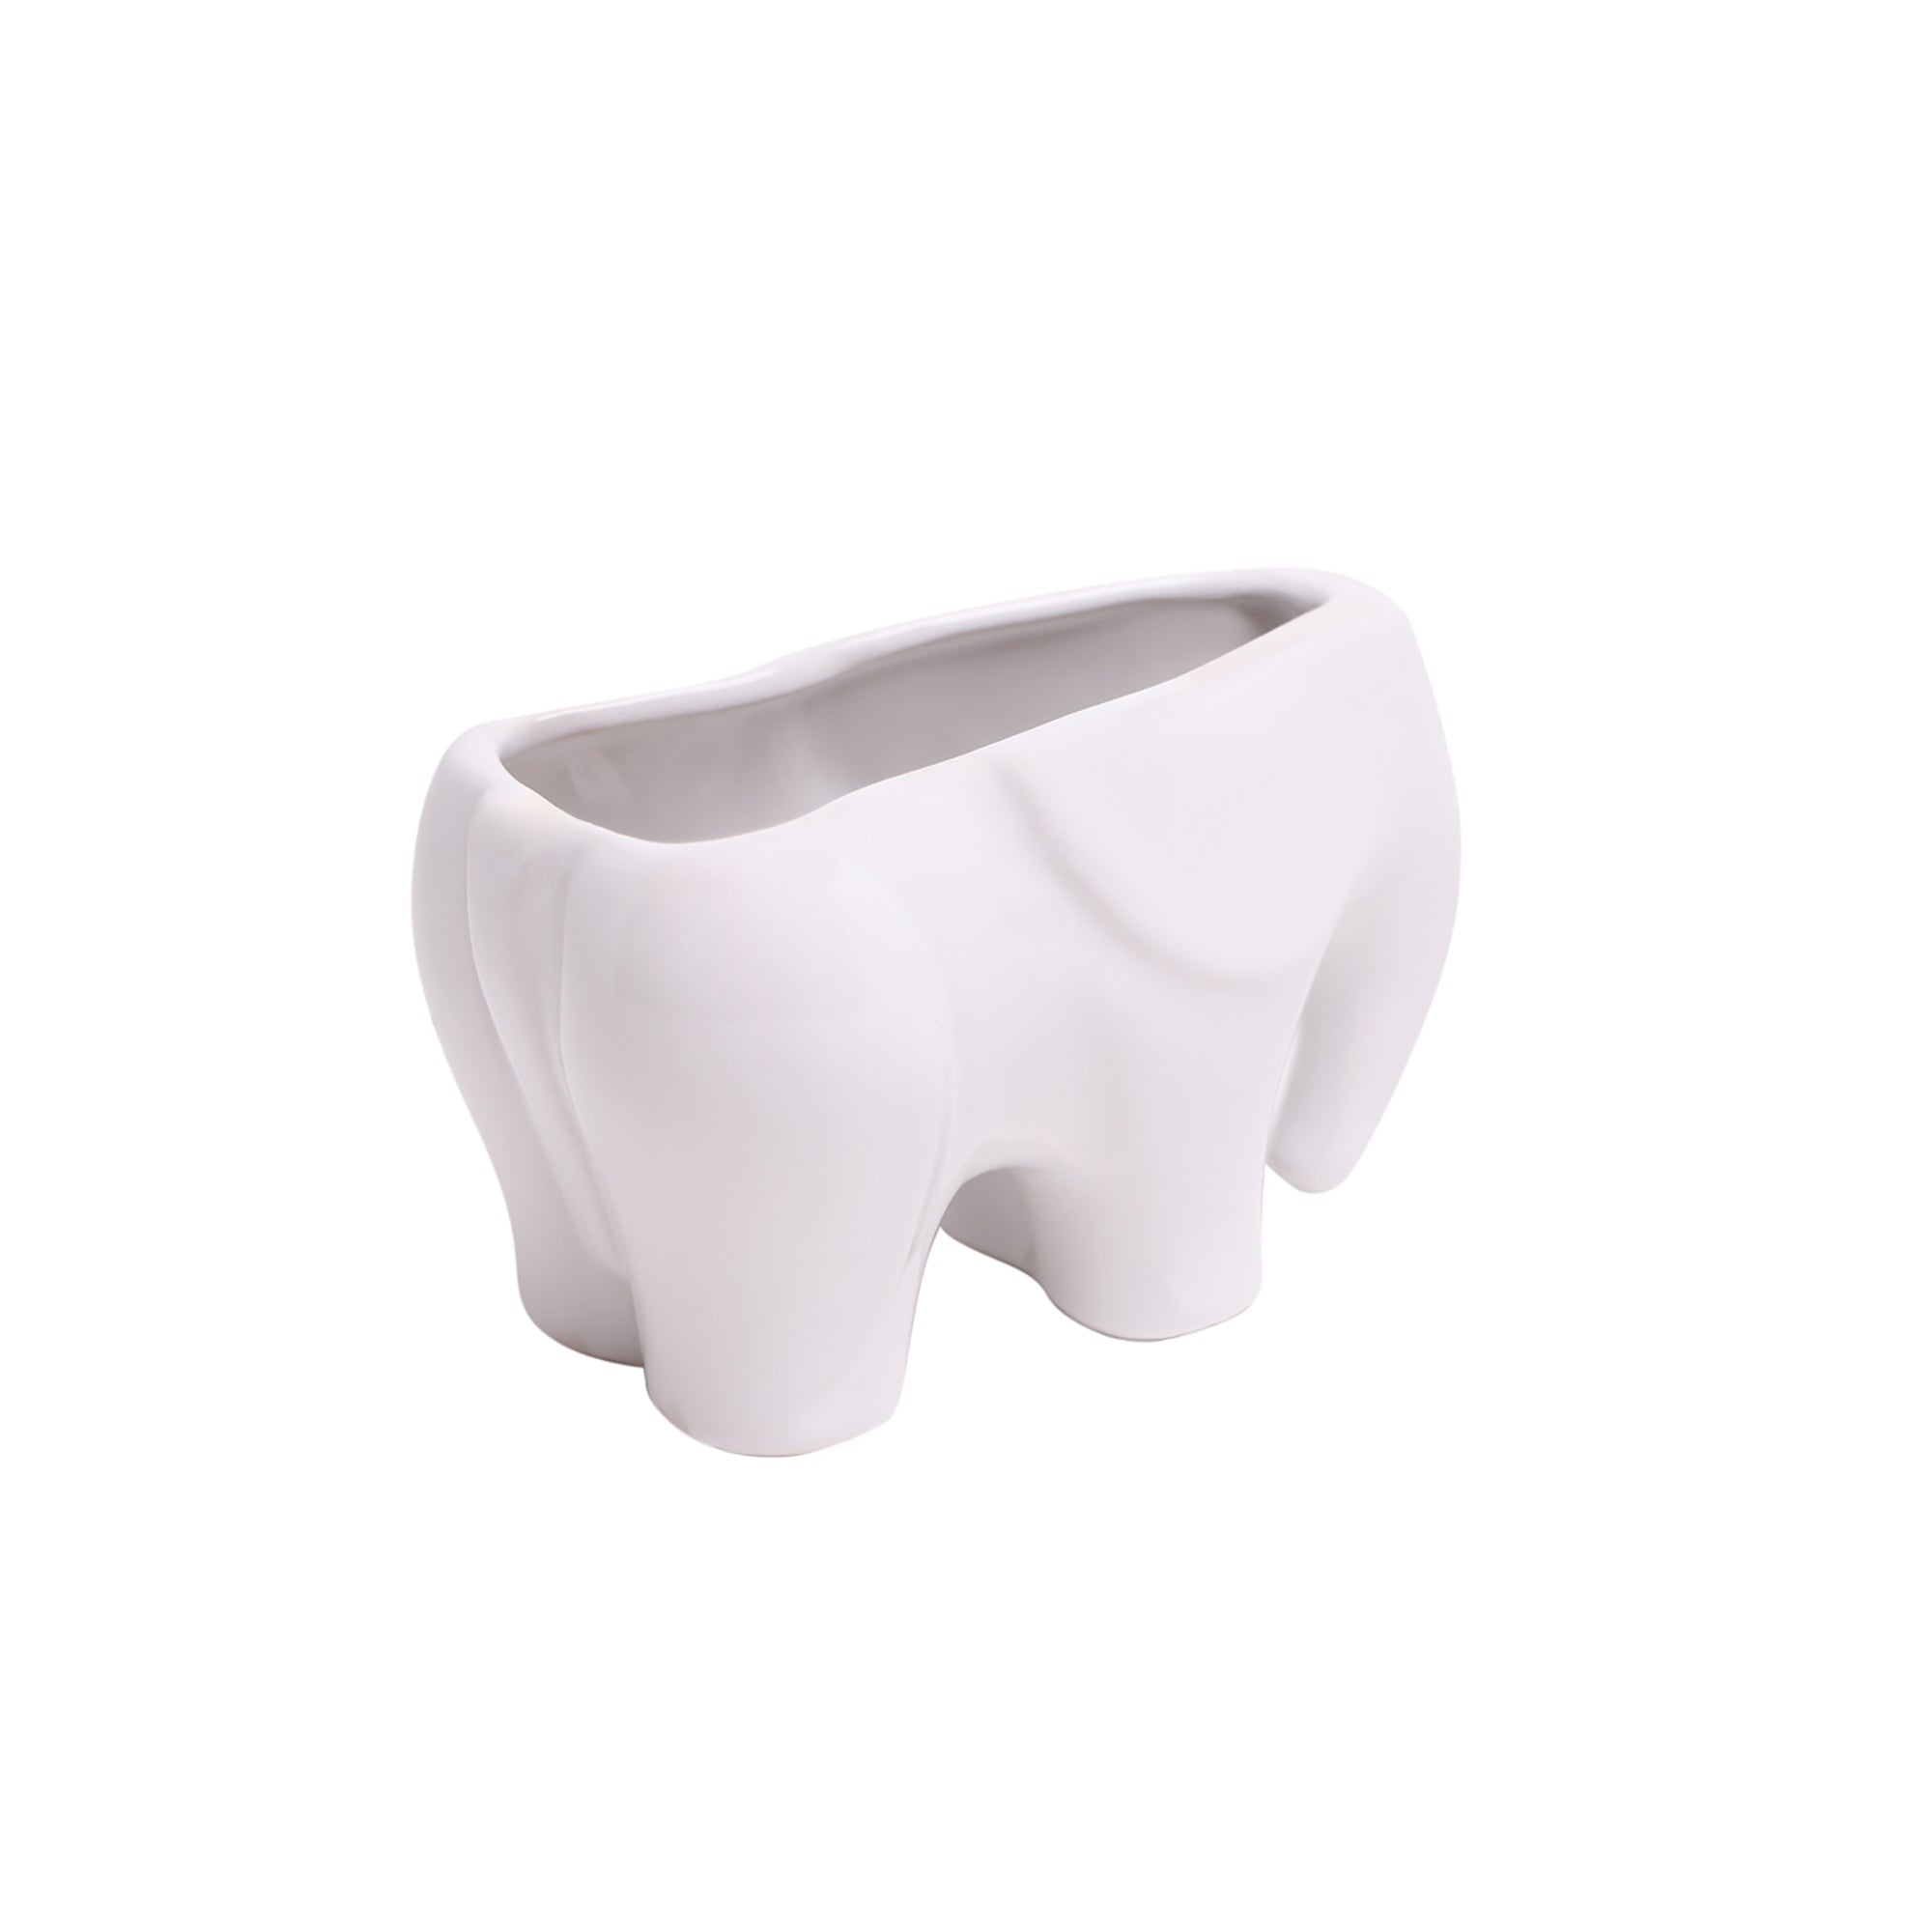 A white ceramic planter in the shape of a sad elephant, isolated on a white background. The Elephant Ceramic Indoor Plant Pot For Succulents hollow in the elephant's back is intended for holding a plant.